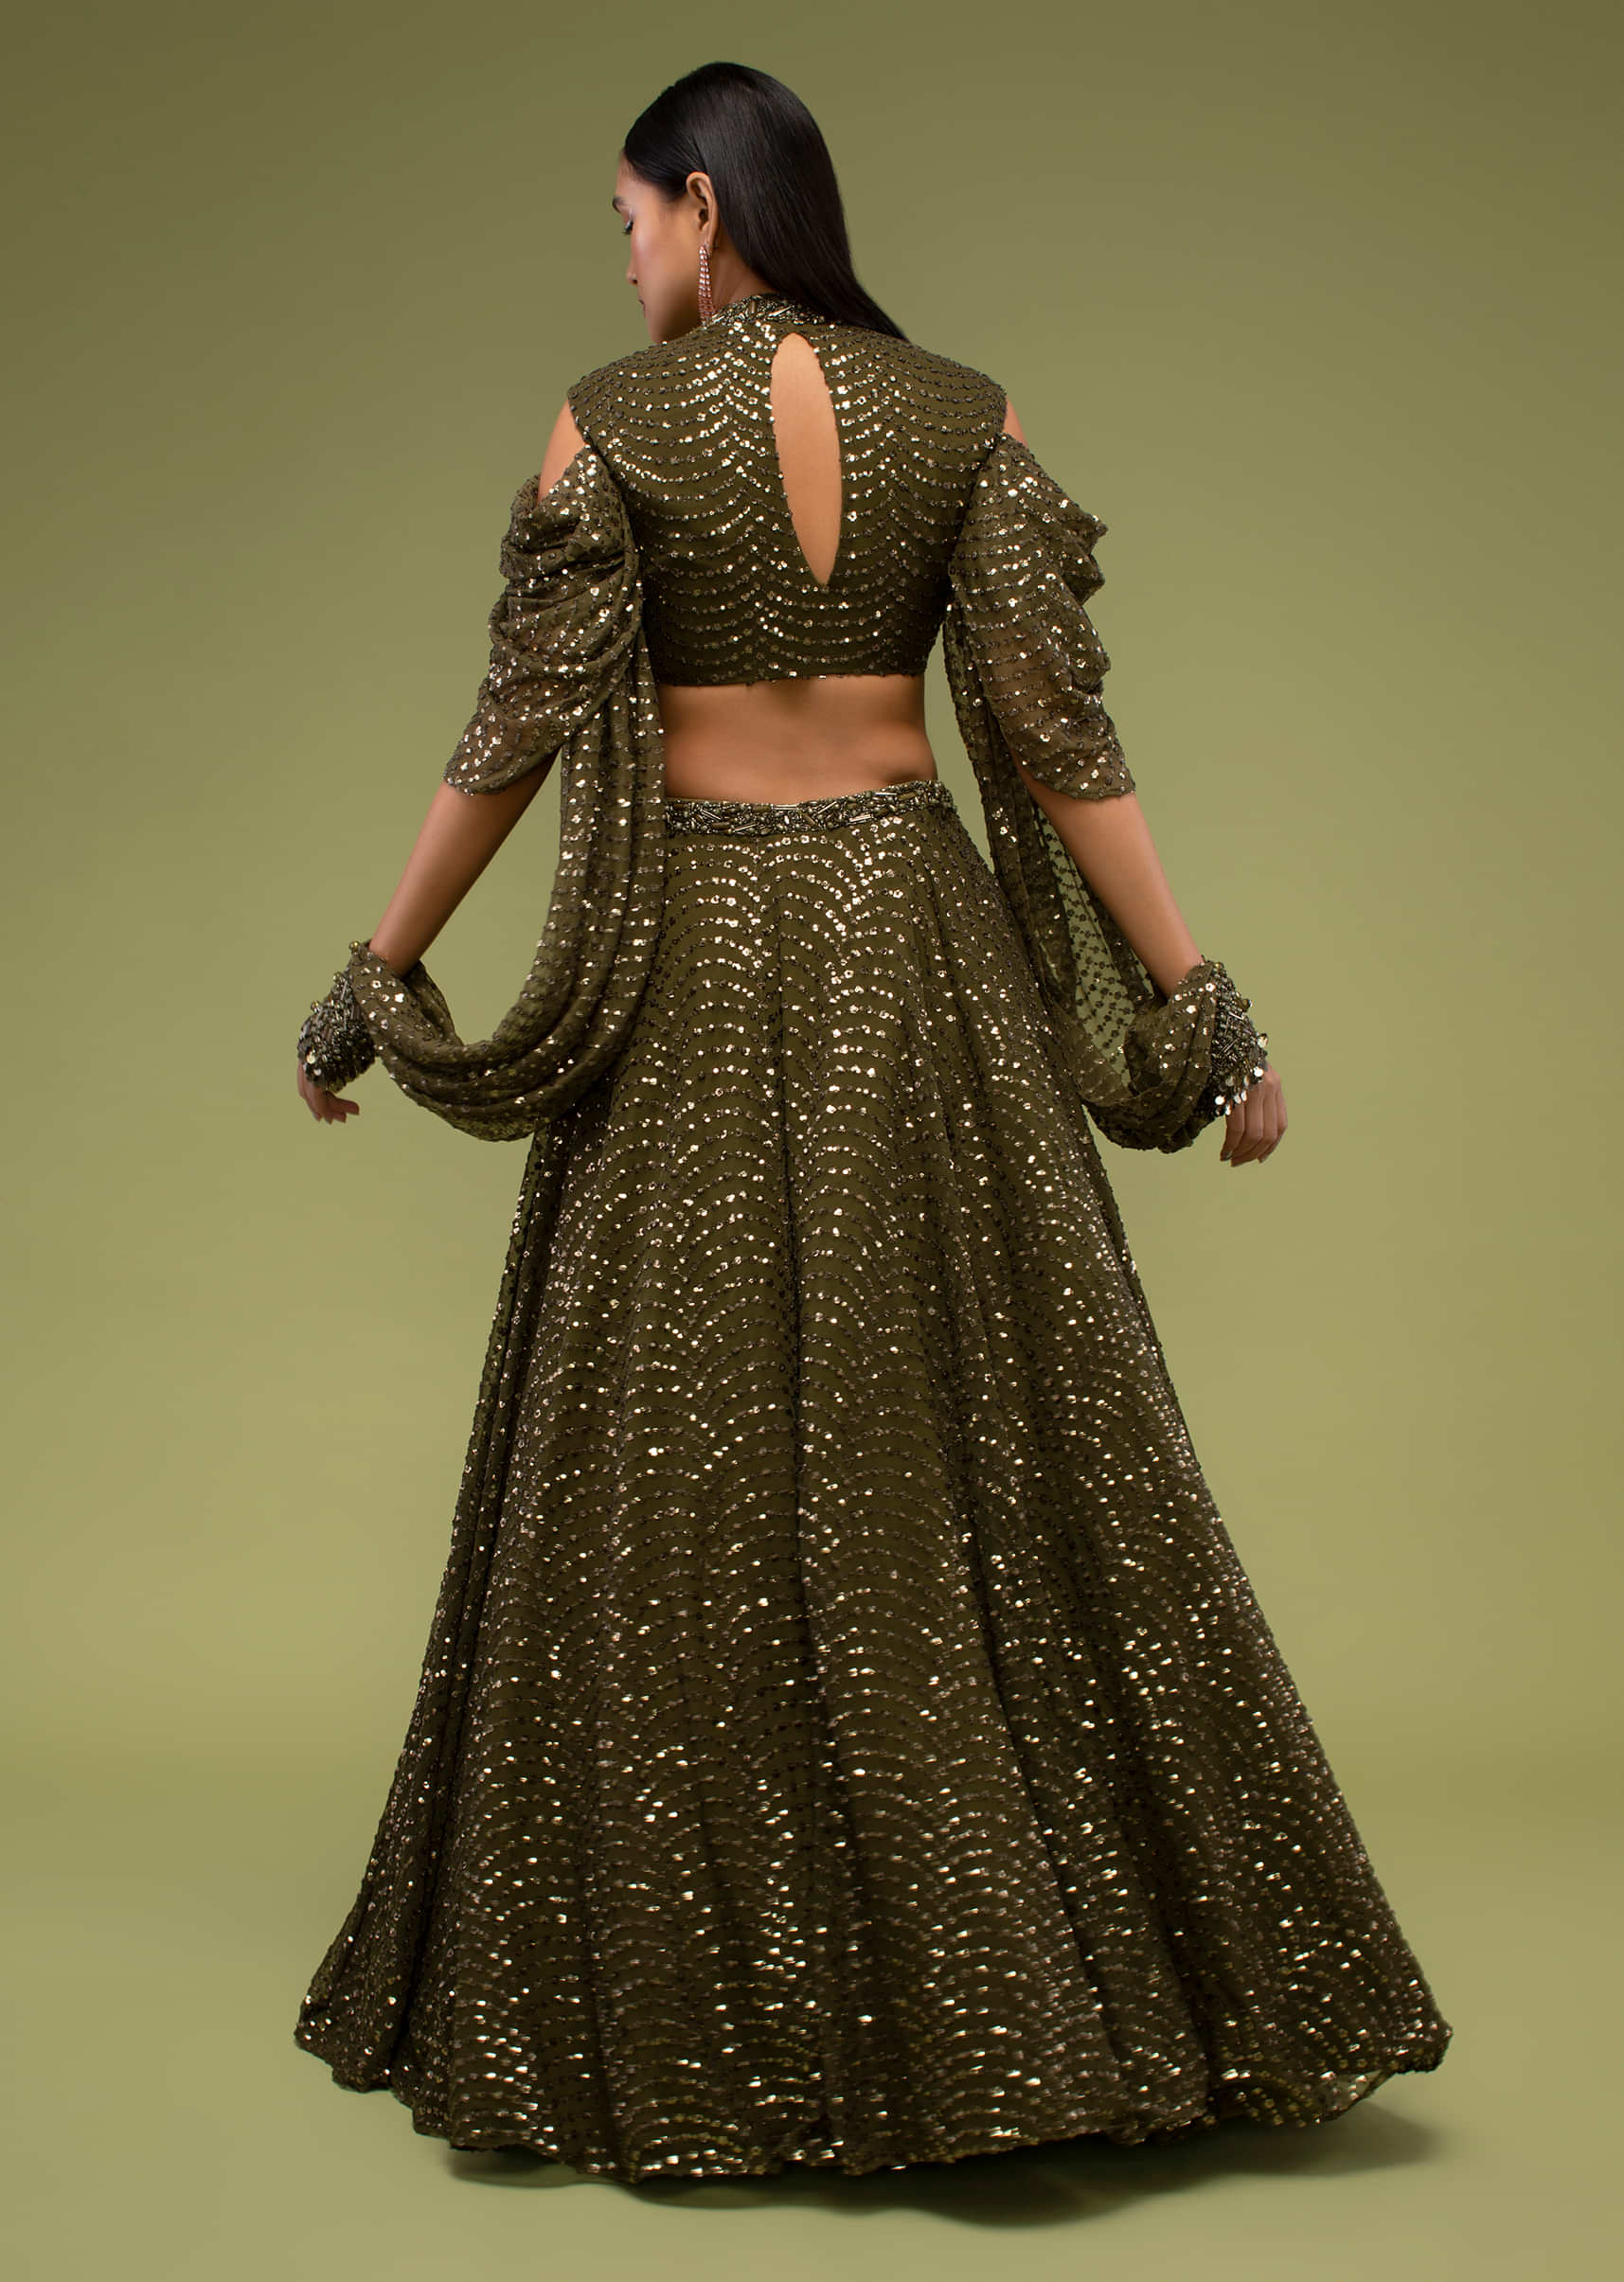 Military Olive Lehenga And Crop Top In Sequins Embroidery, Paired With The Crop Top In Crew Neckline With A Key-Hole 